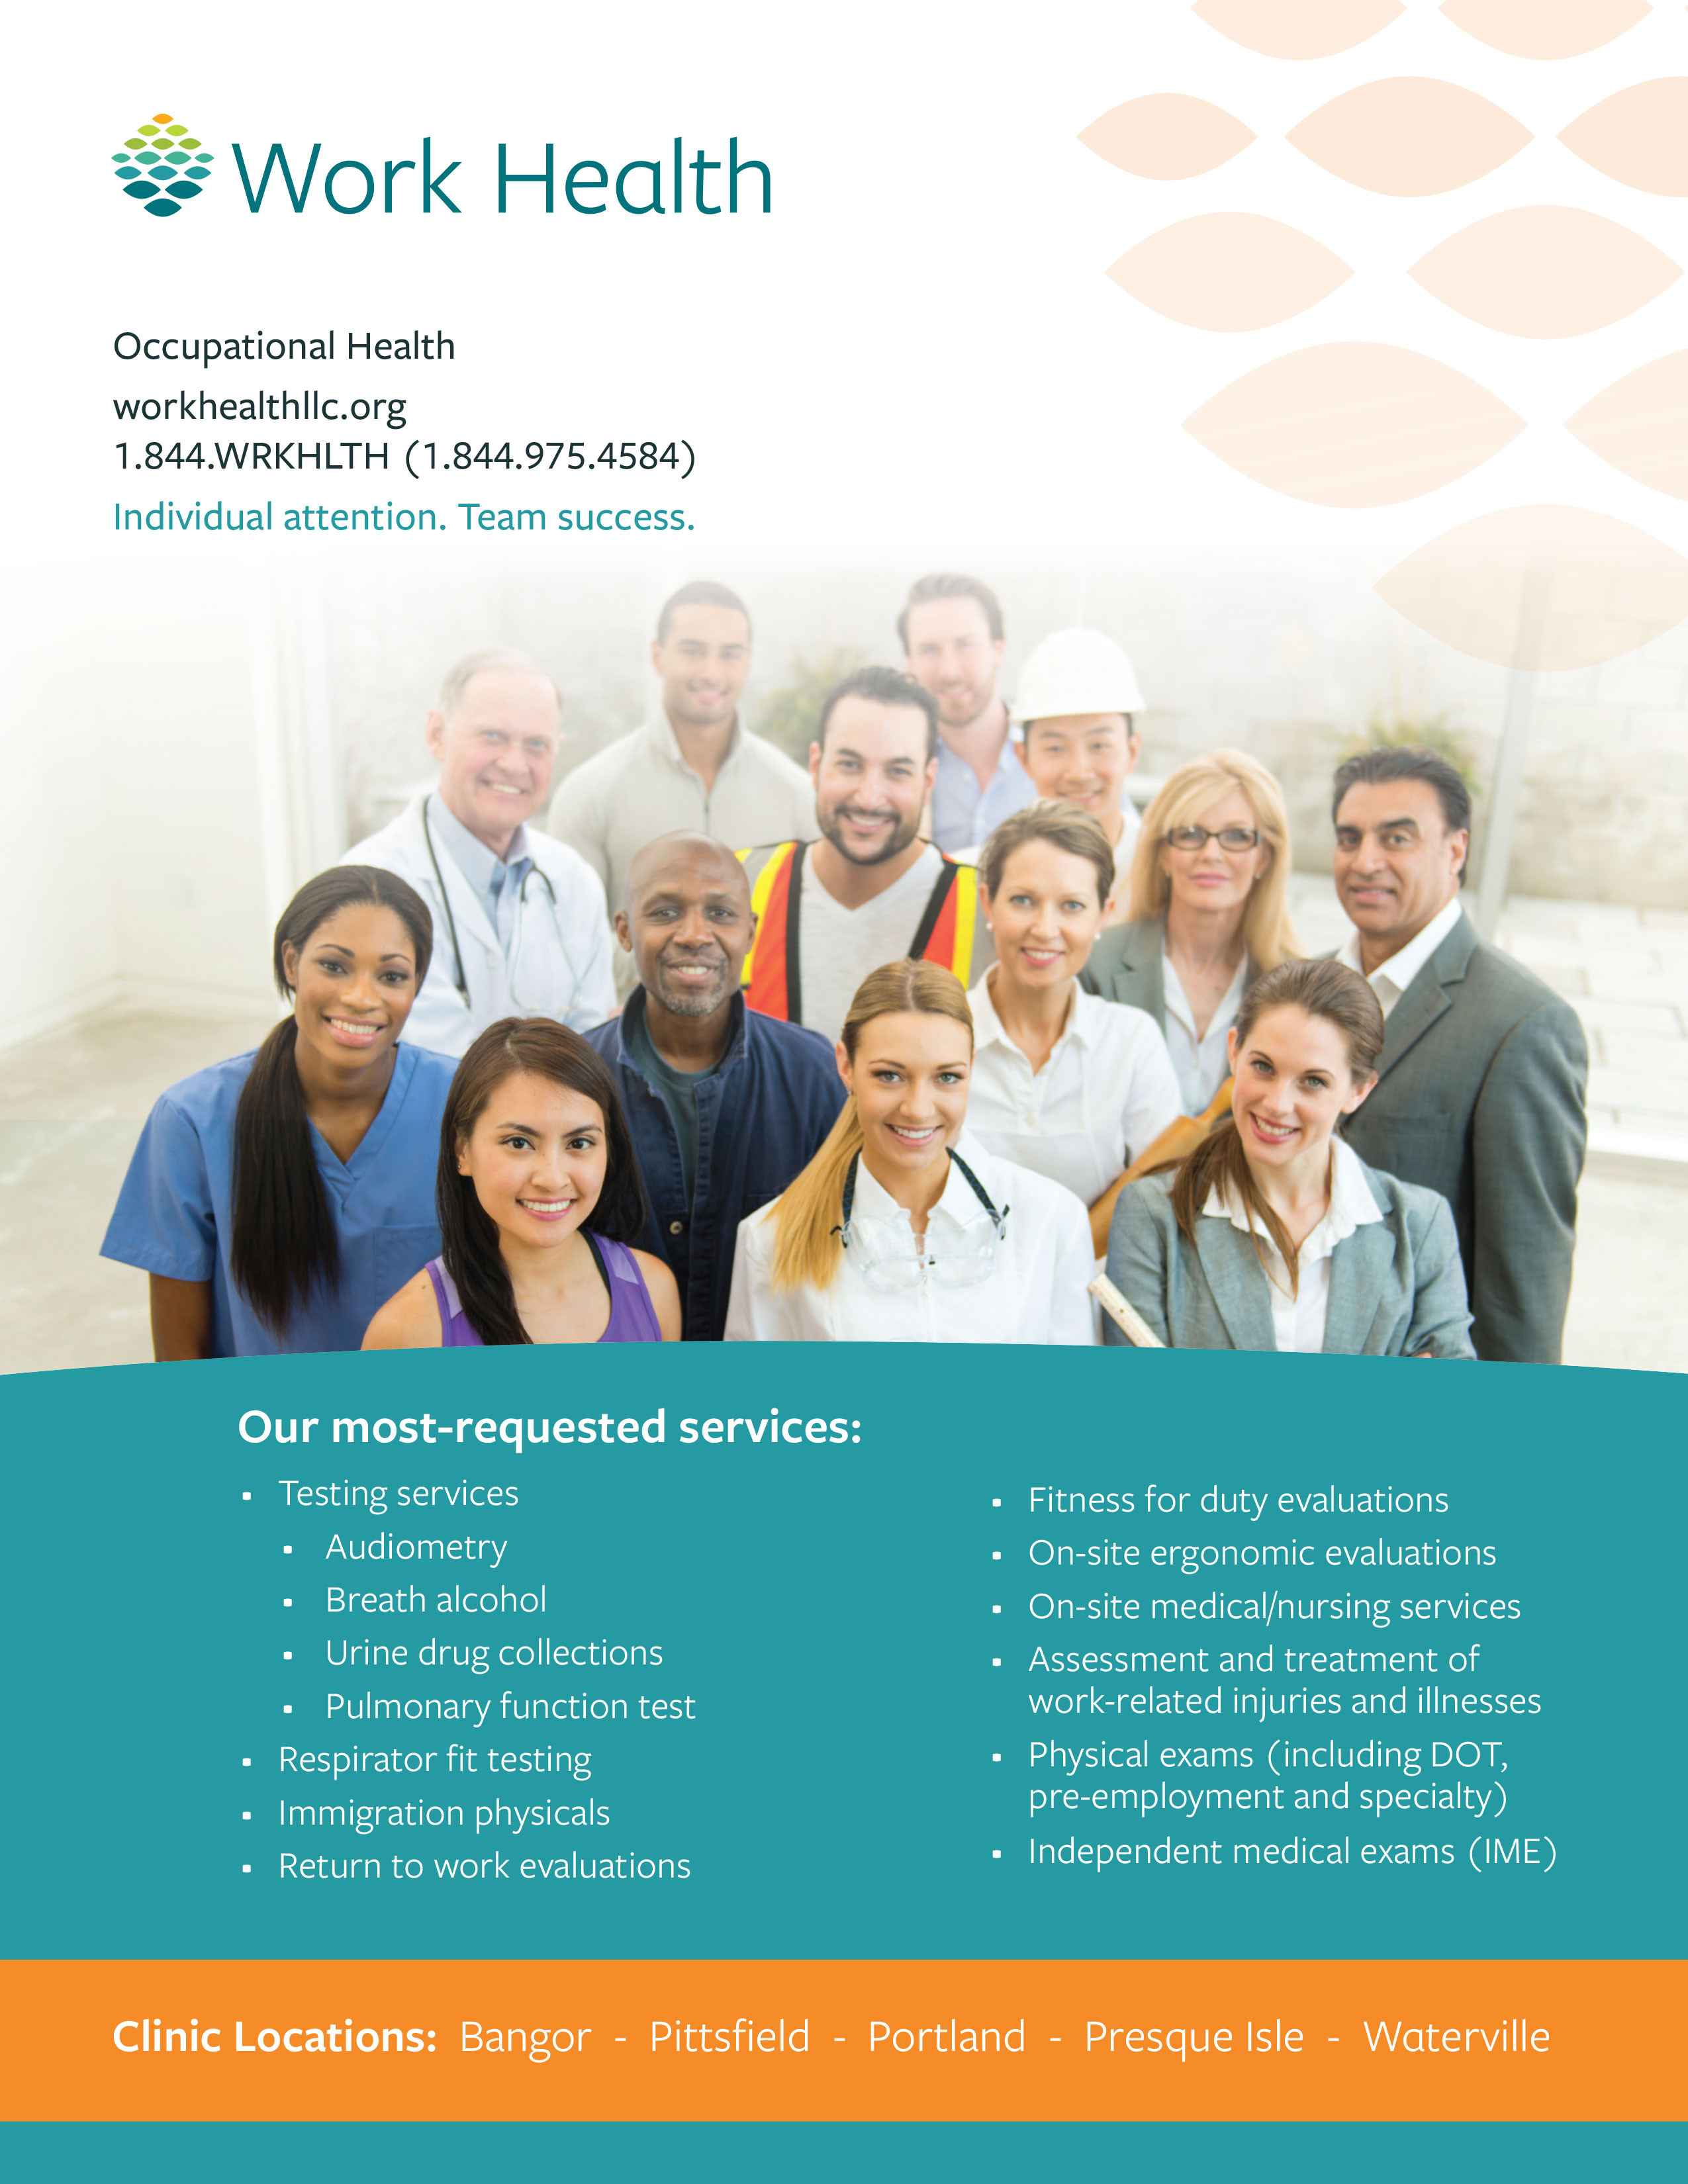 Work Health Business Solutions - Poster